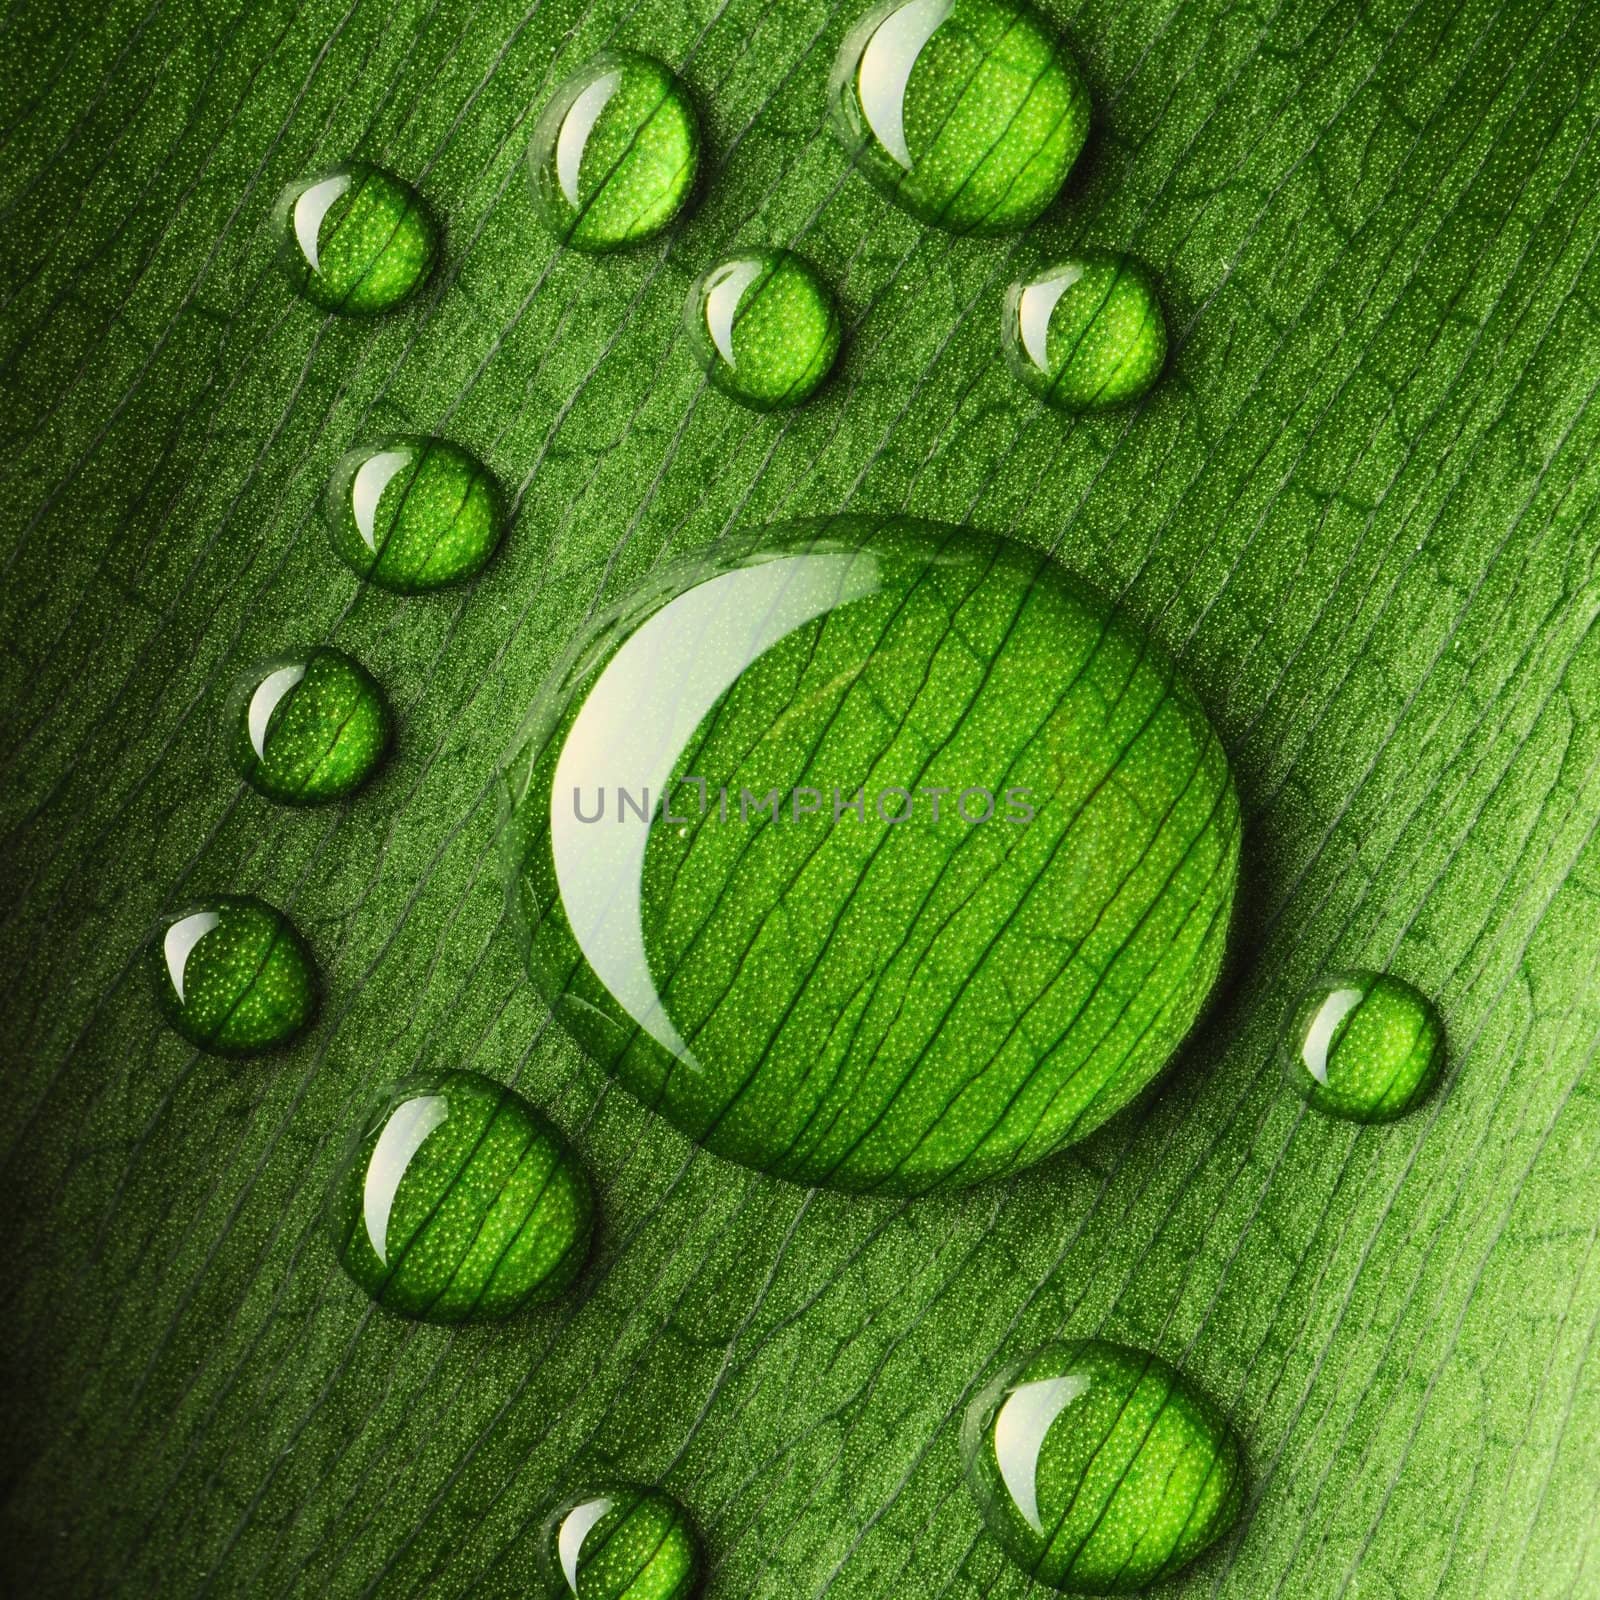 Water drops on leaf by haveseen